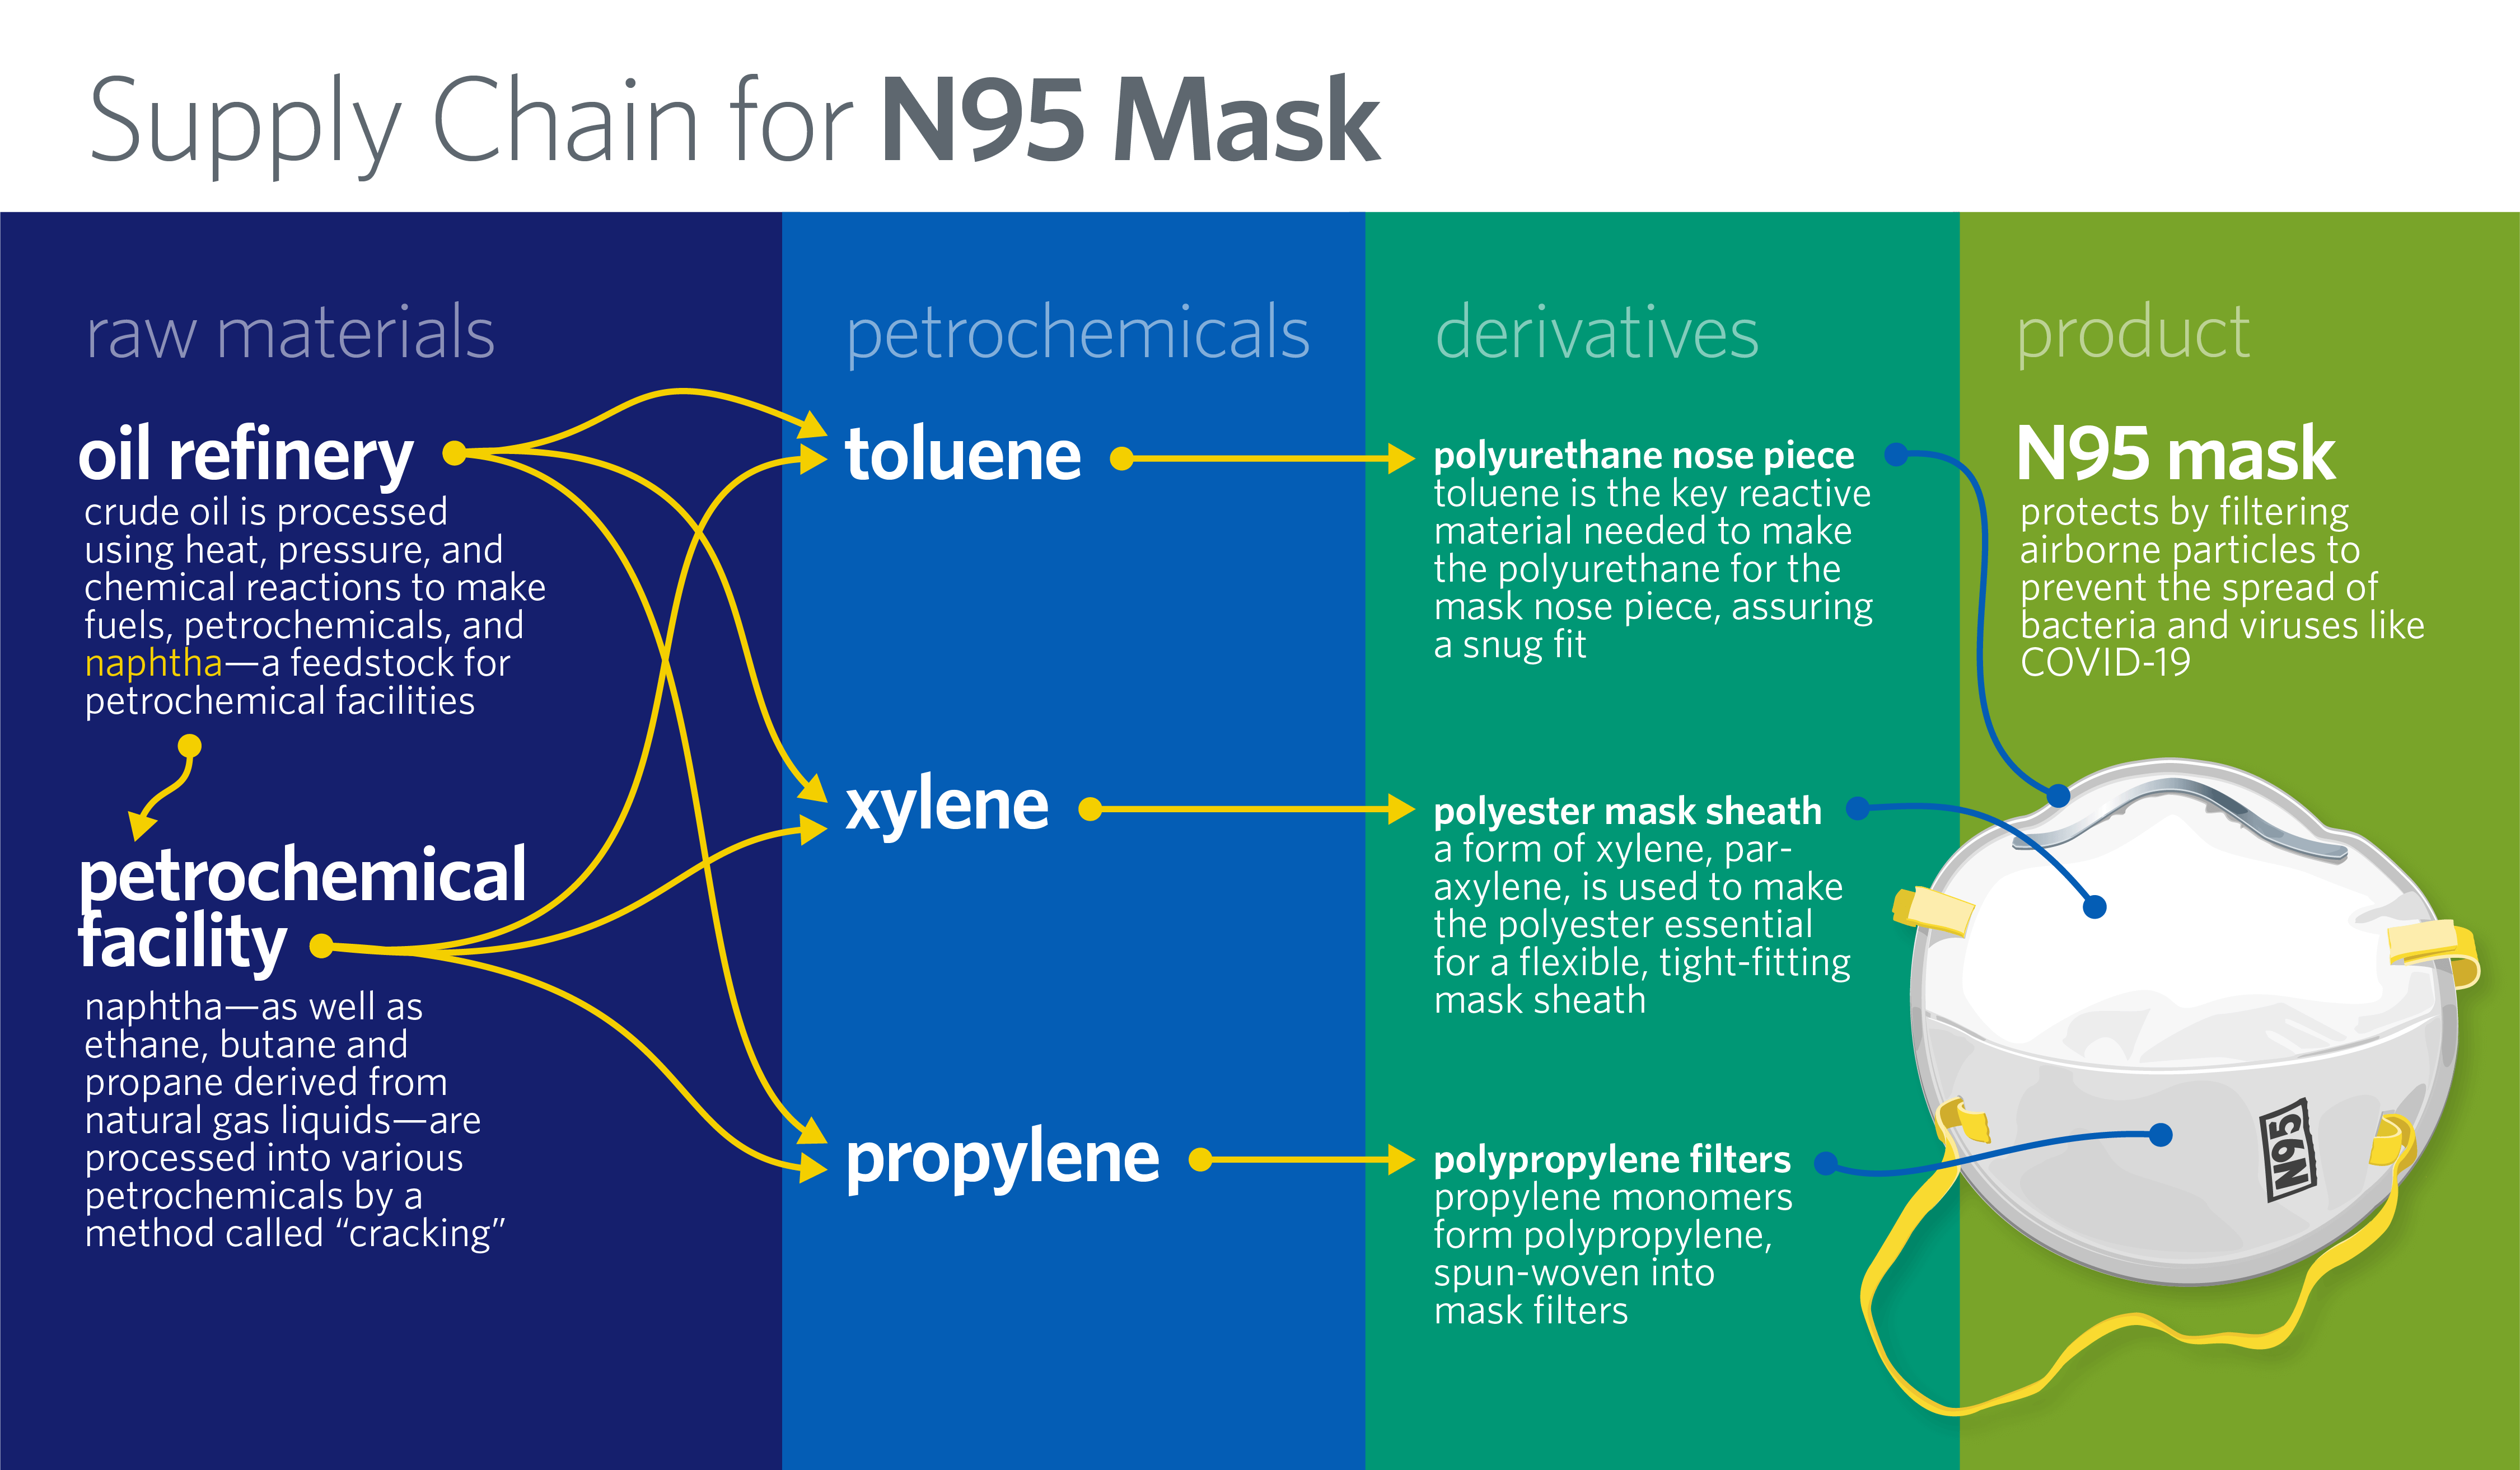 Graph showing supply chain for N95 mask